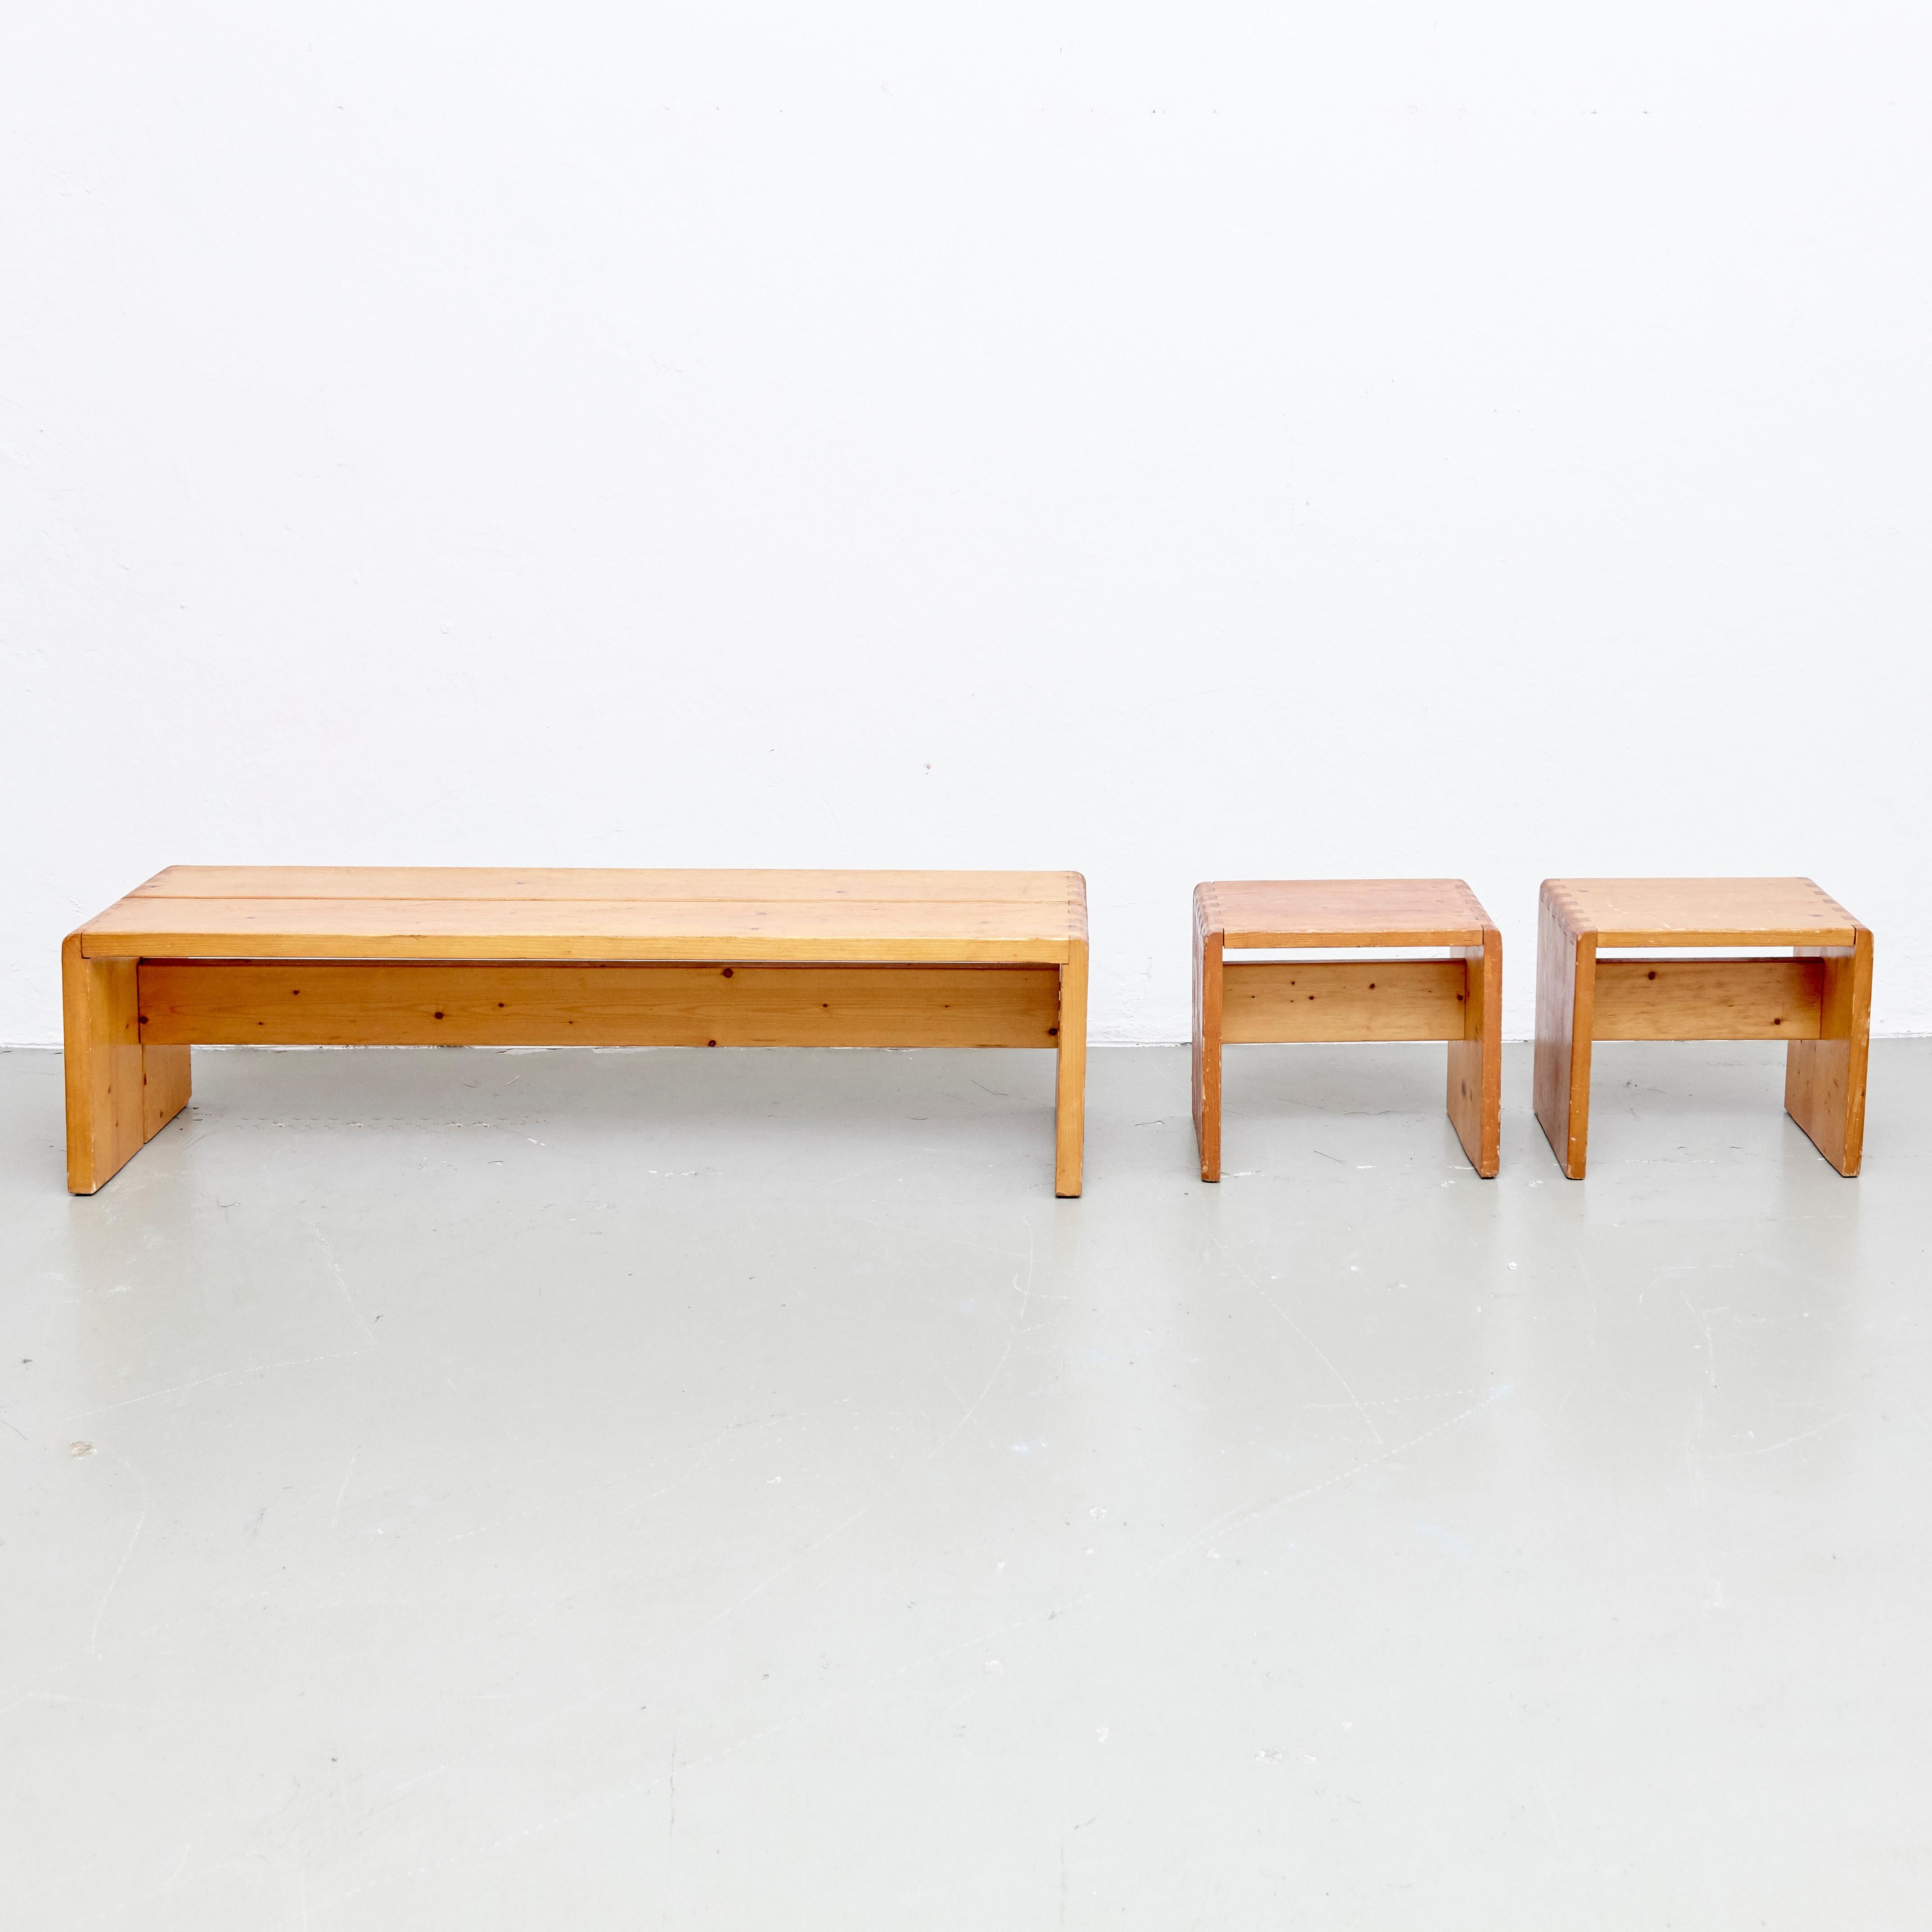 Charlotte Perriand Table, Stools and Bench for Les Arcs 1